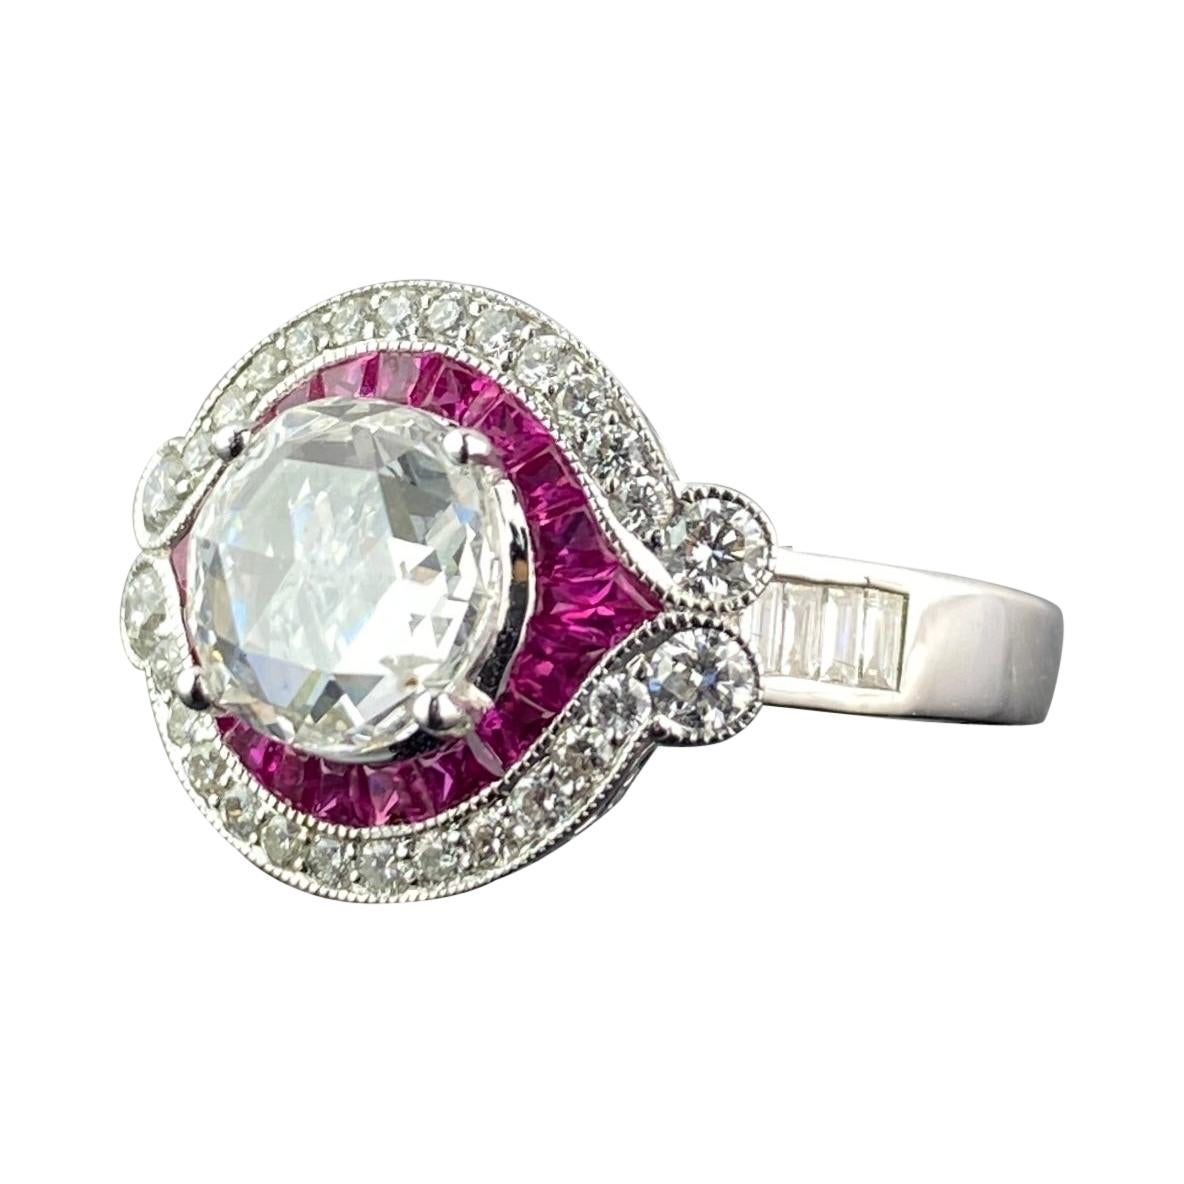 1.32 Carat Diamond and Ruby Solitaire Engagement Ring